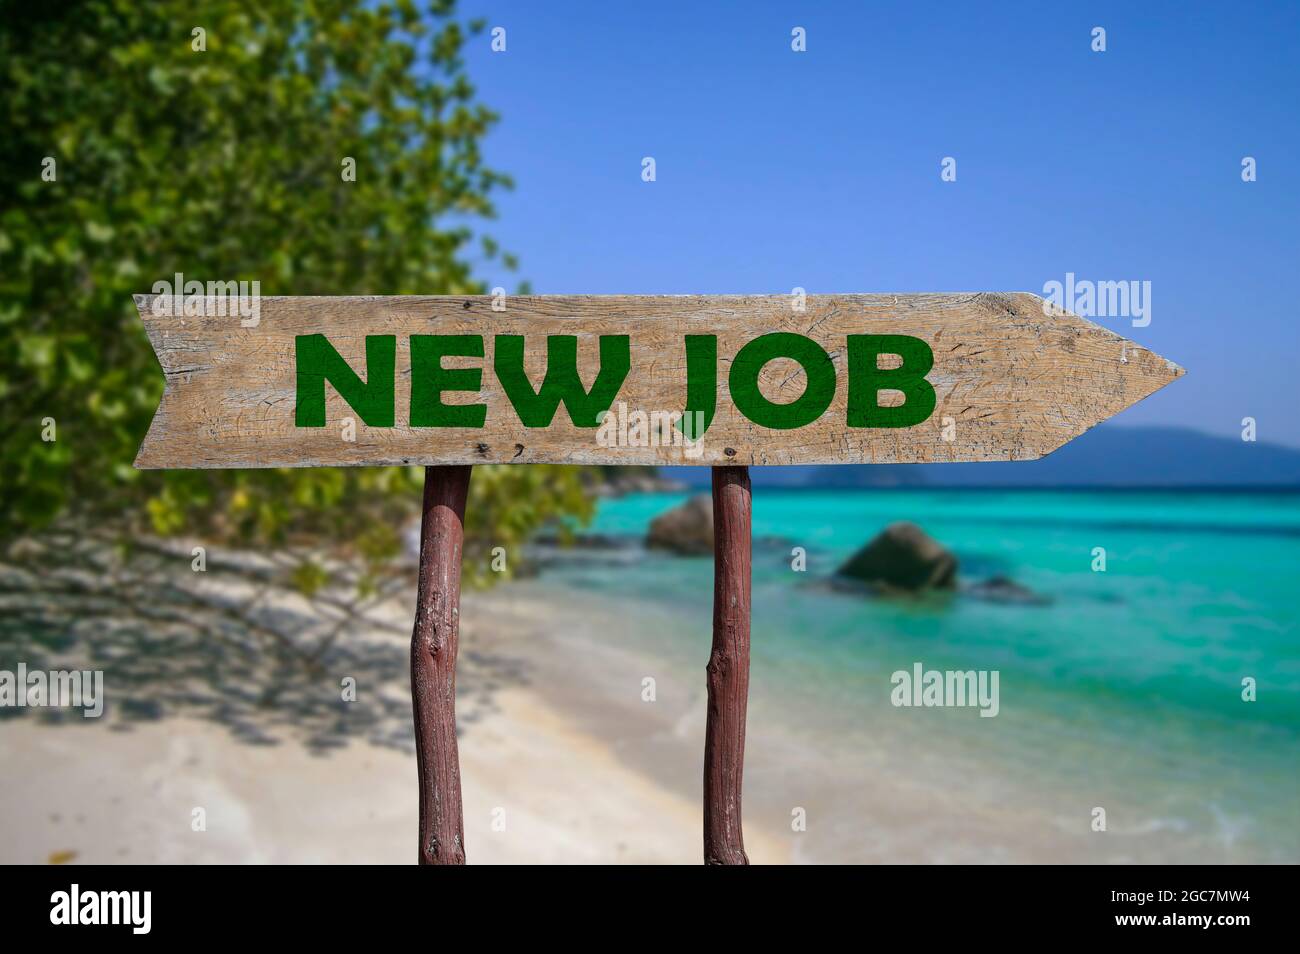 New job wooden arrow road sign against nature background Stock Photo